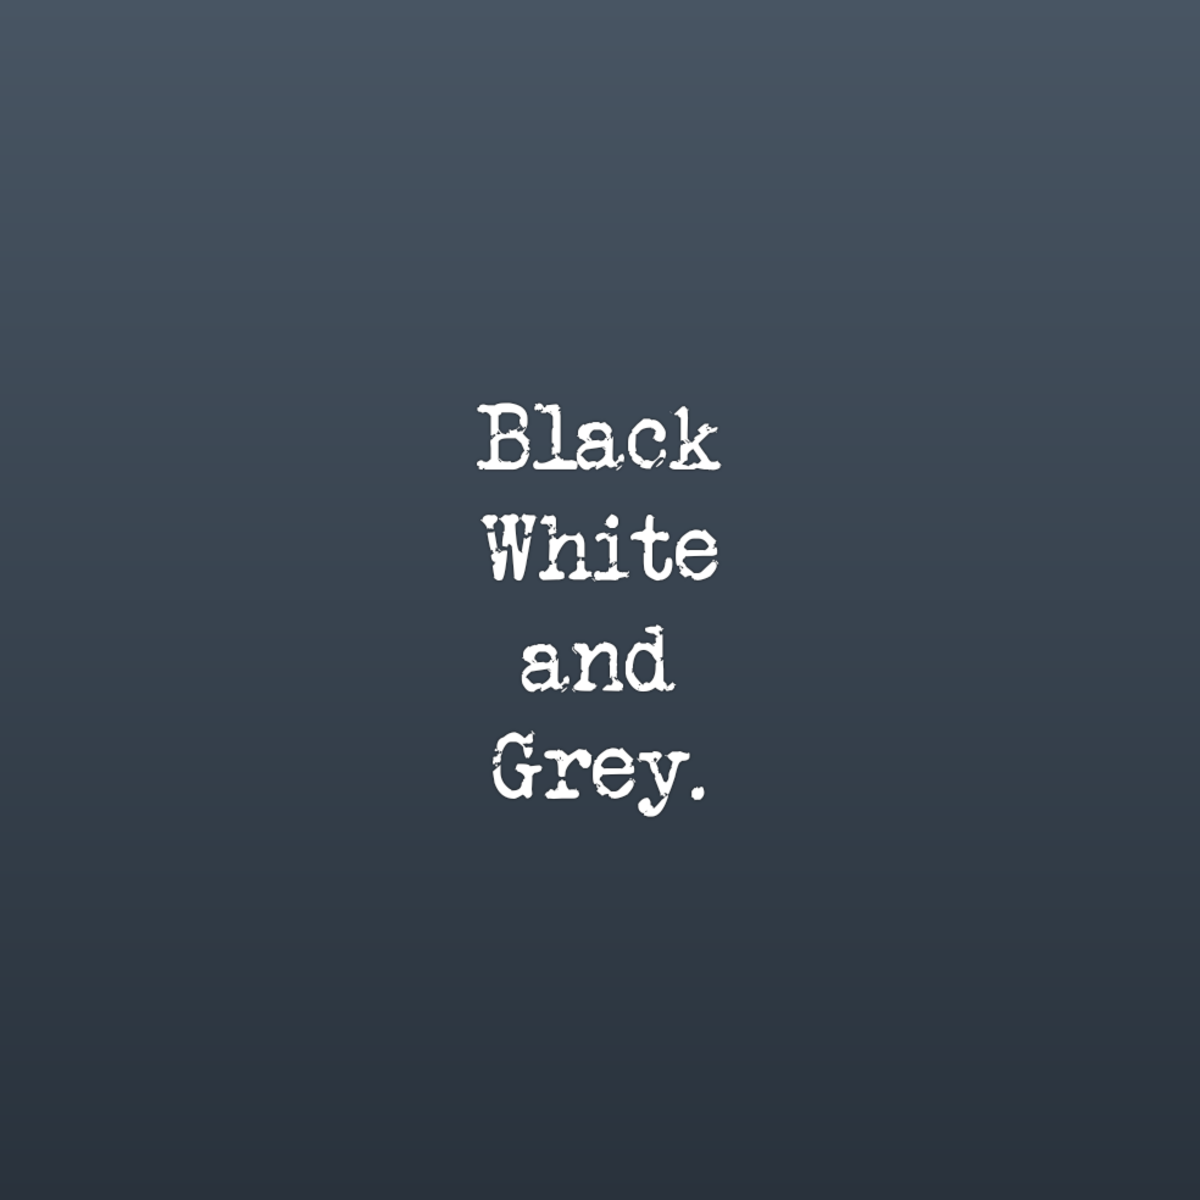 Black, White, and Grey.